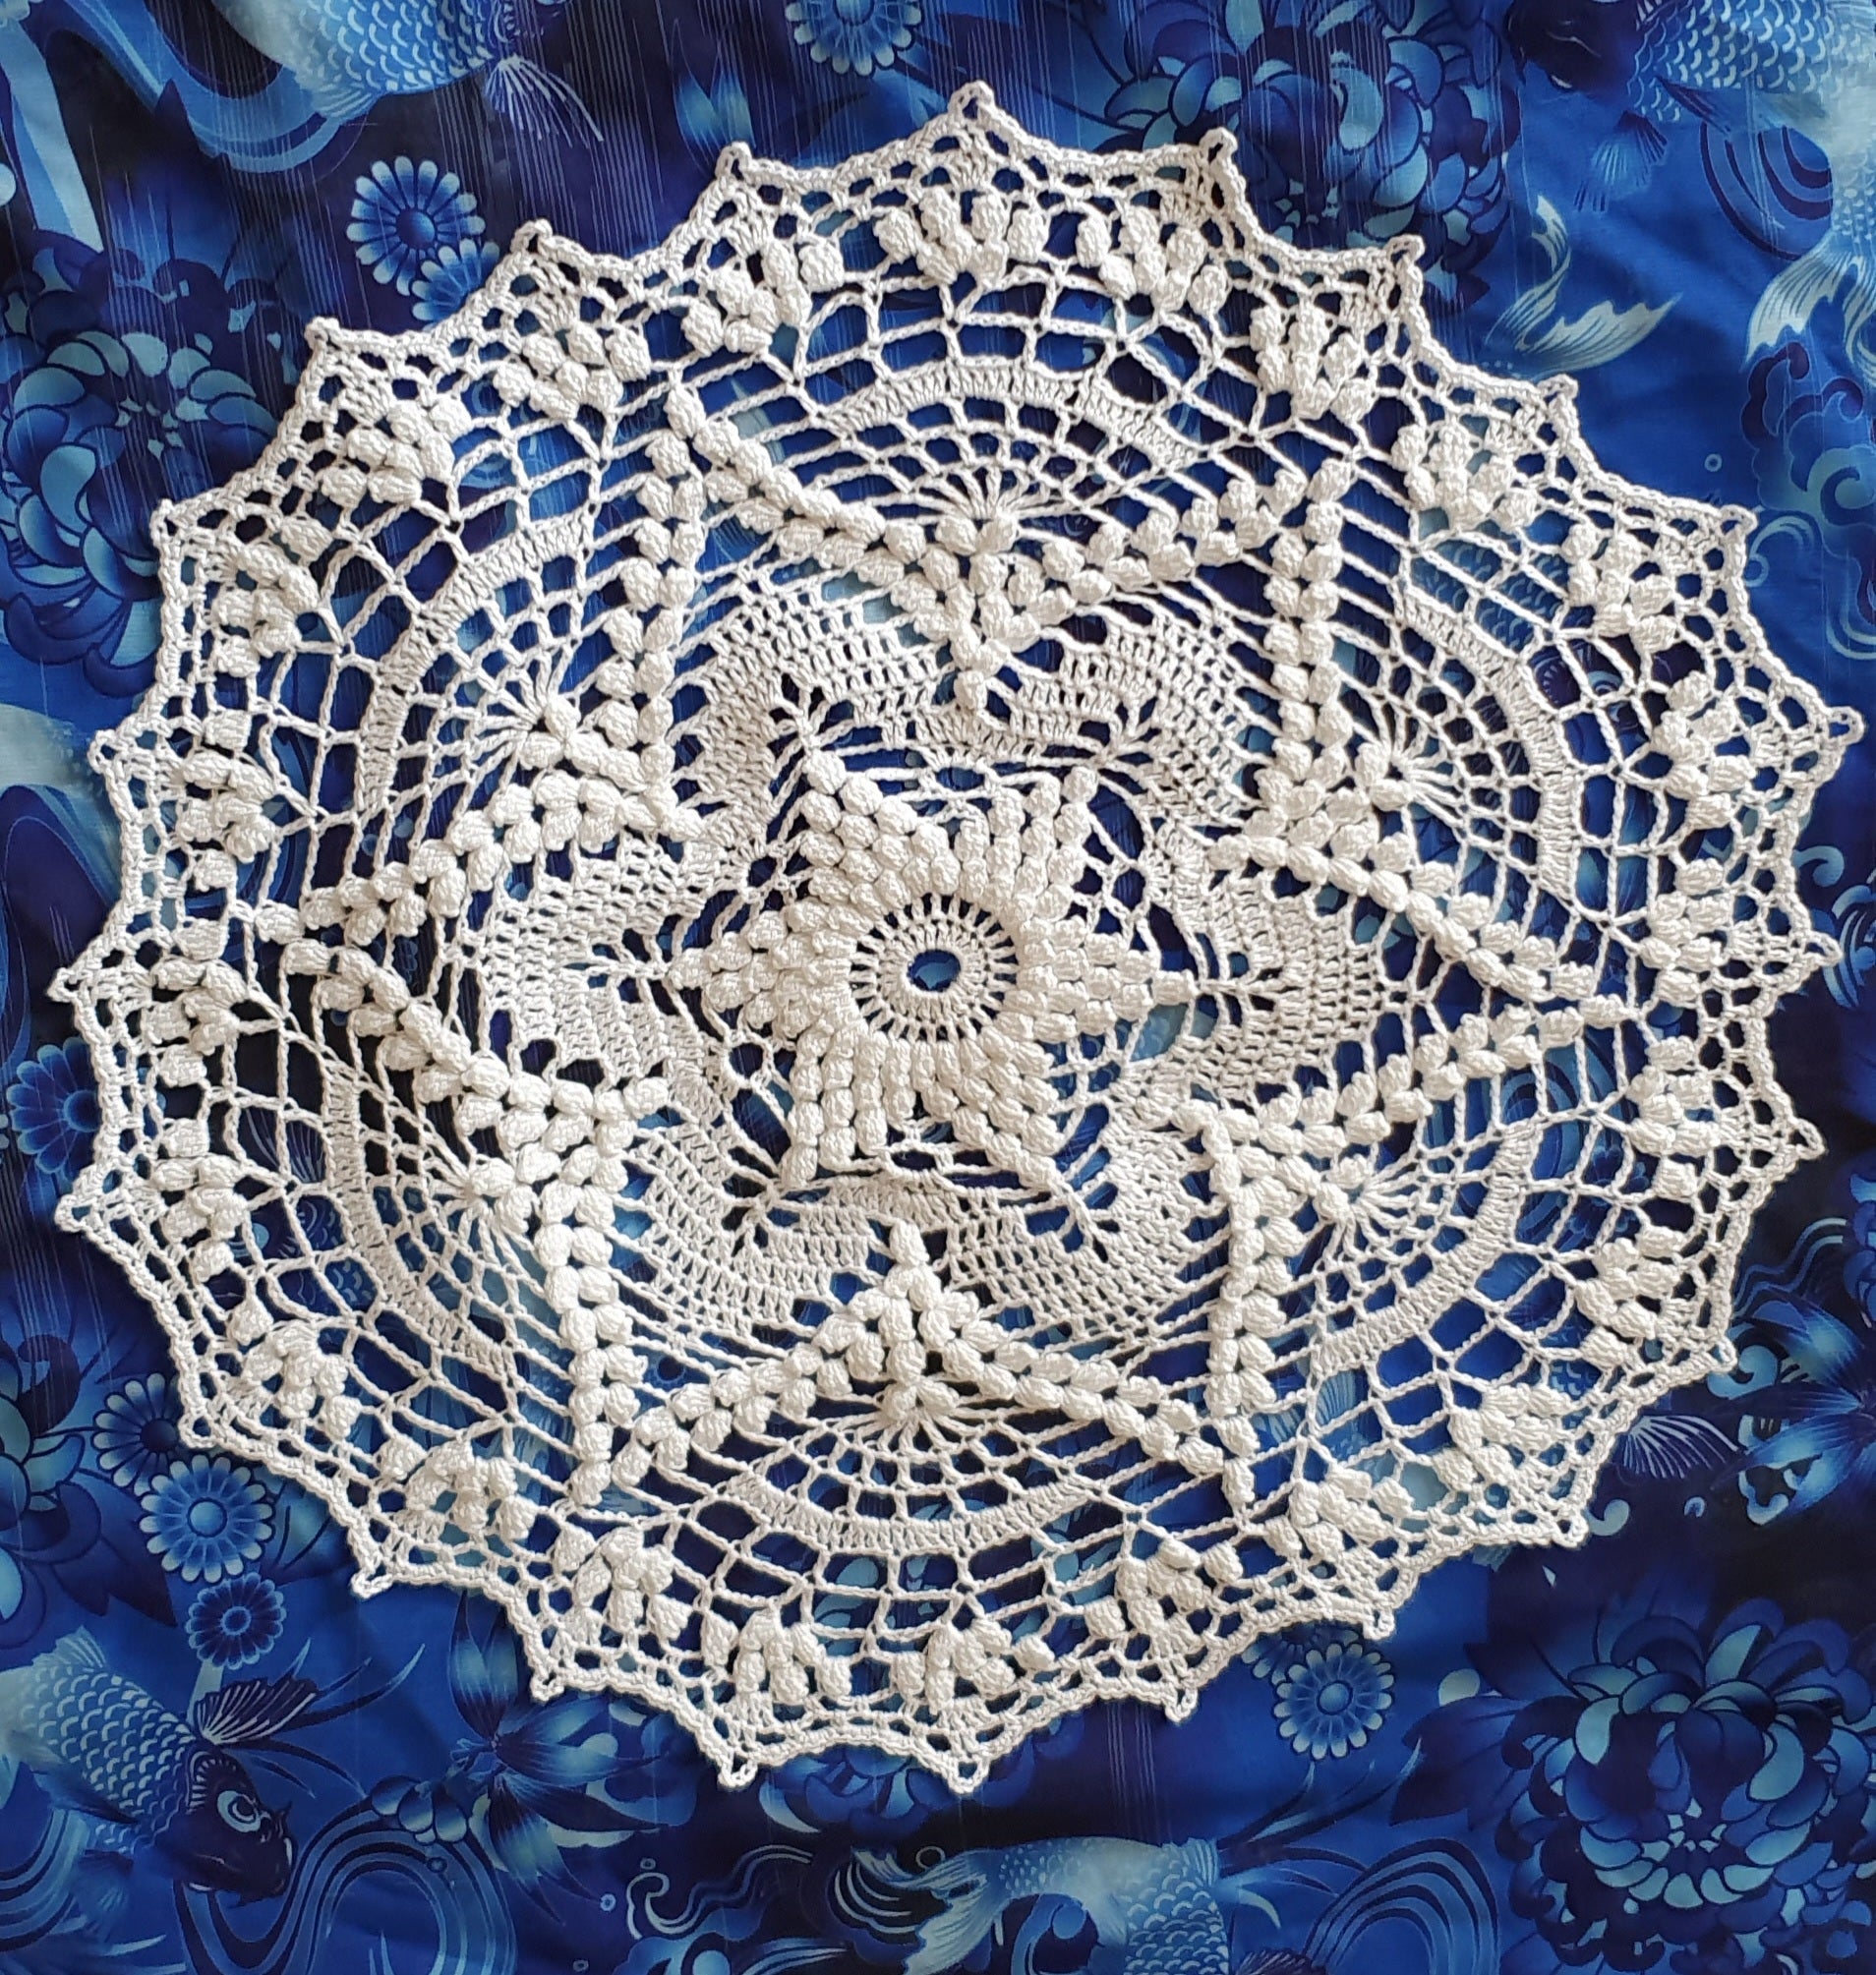 3D crochet table cloth with star pattern